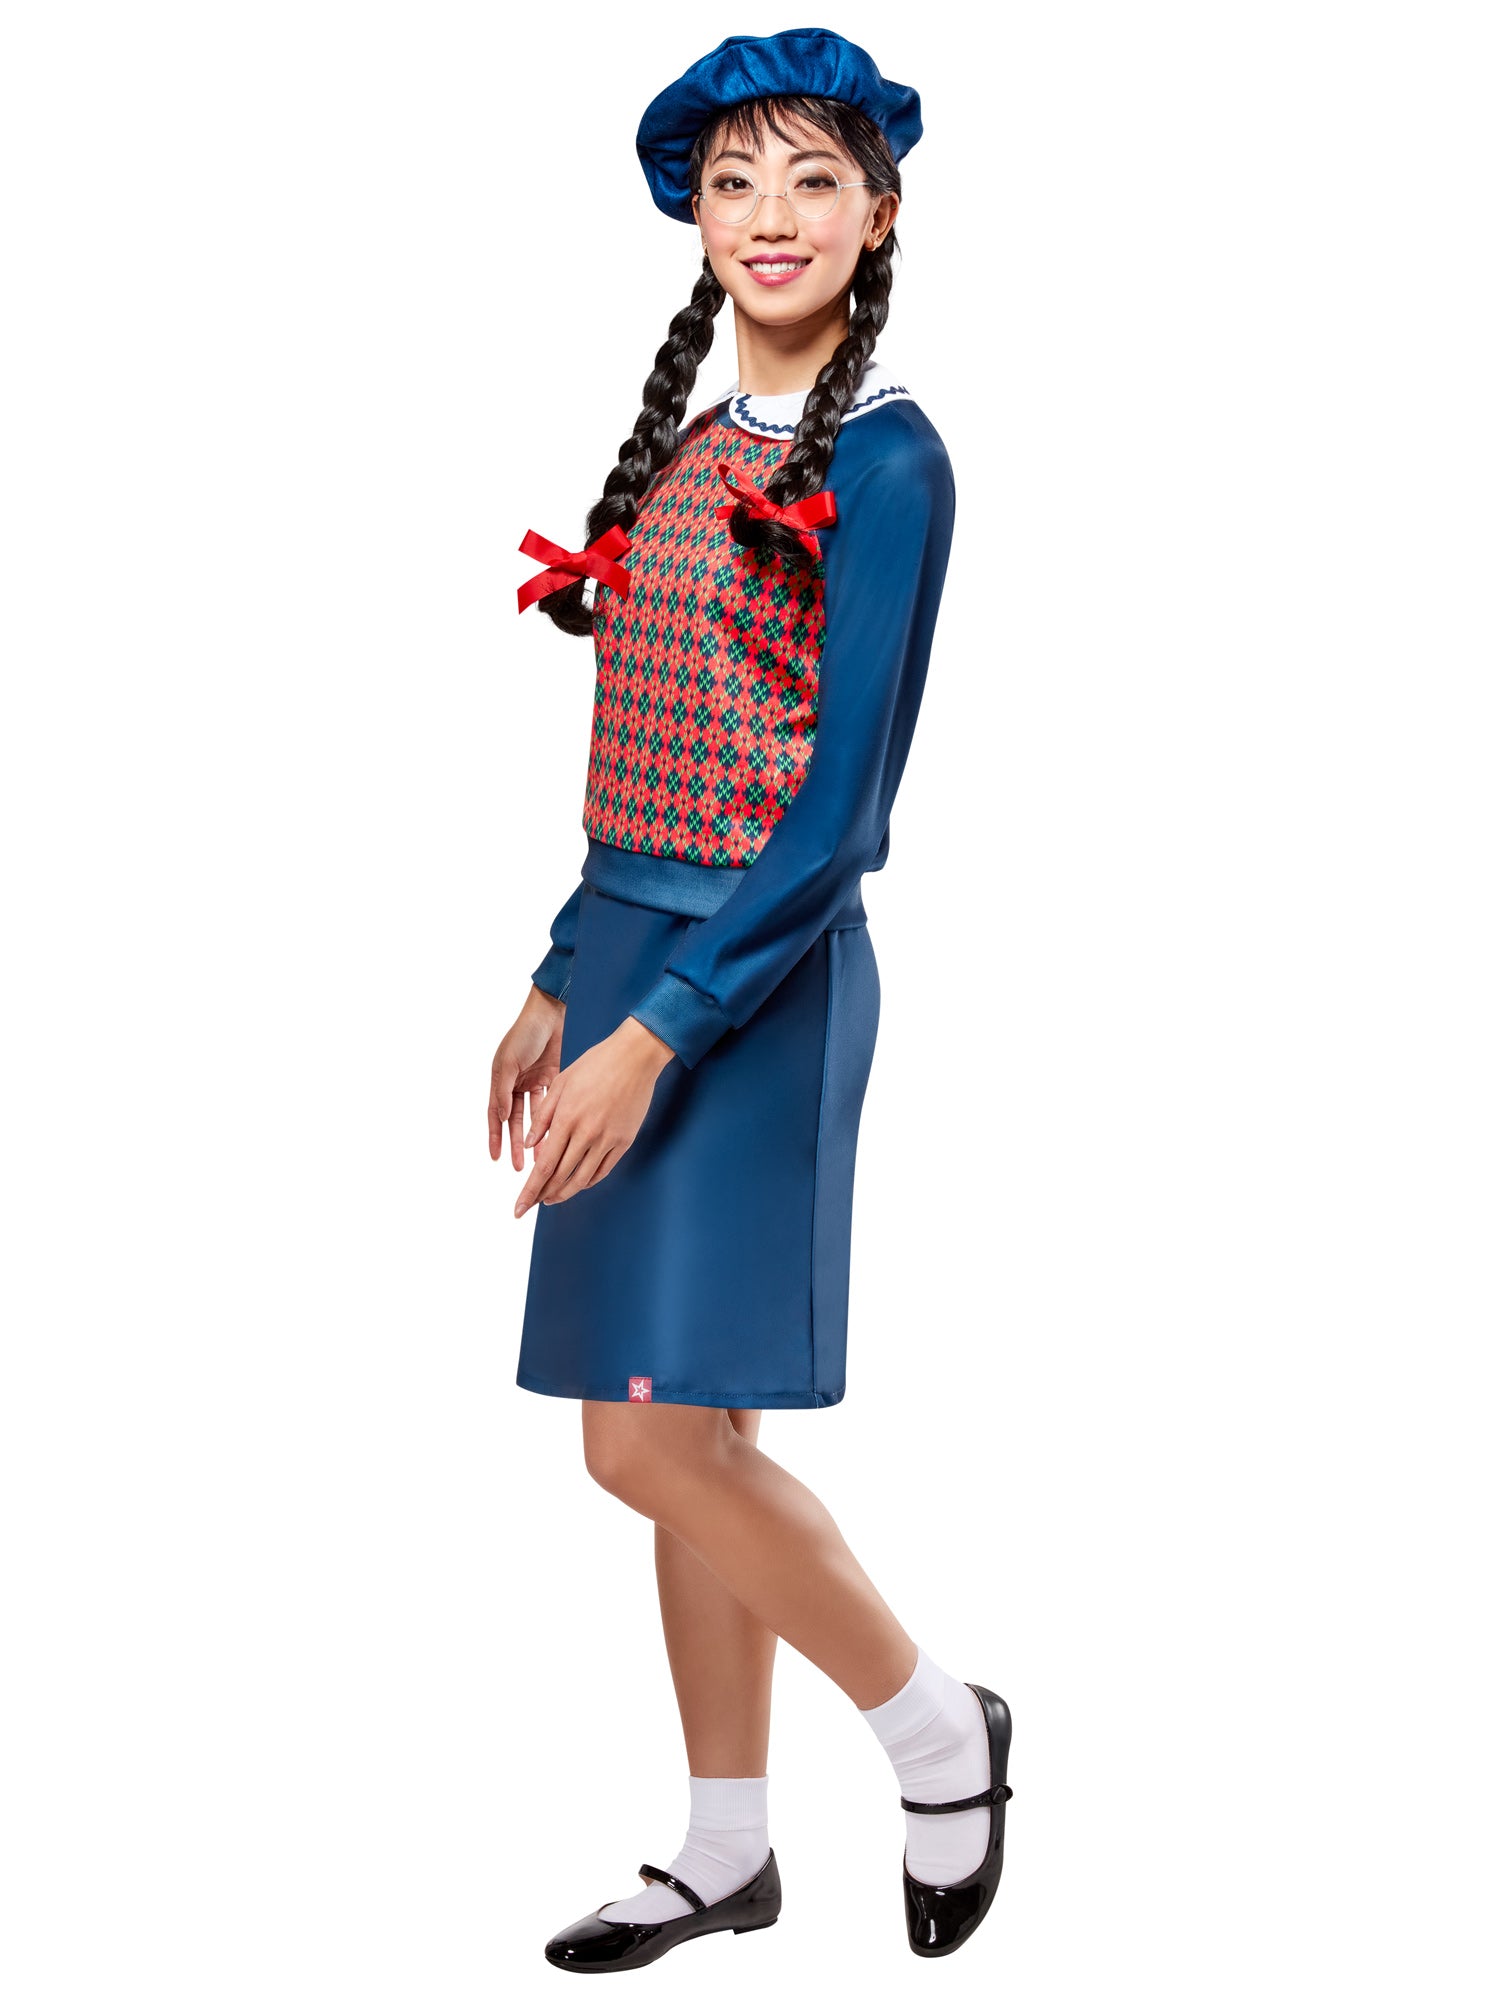 Women's American Girl Molly McIntire Dress with Beret Costume Set - costumes.com